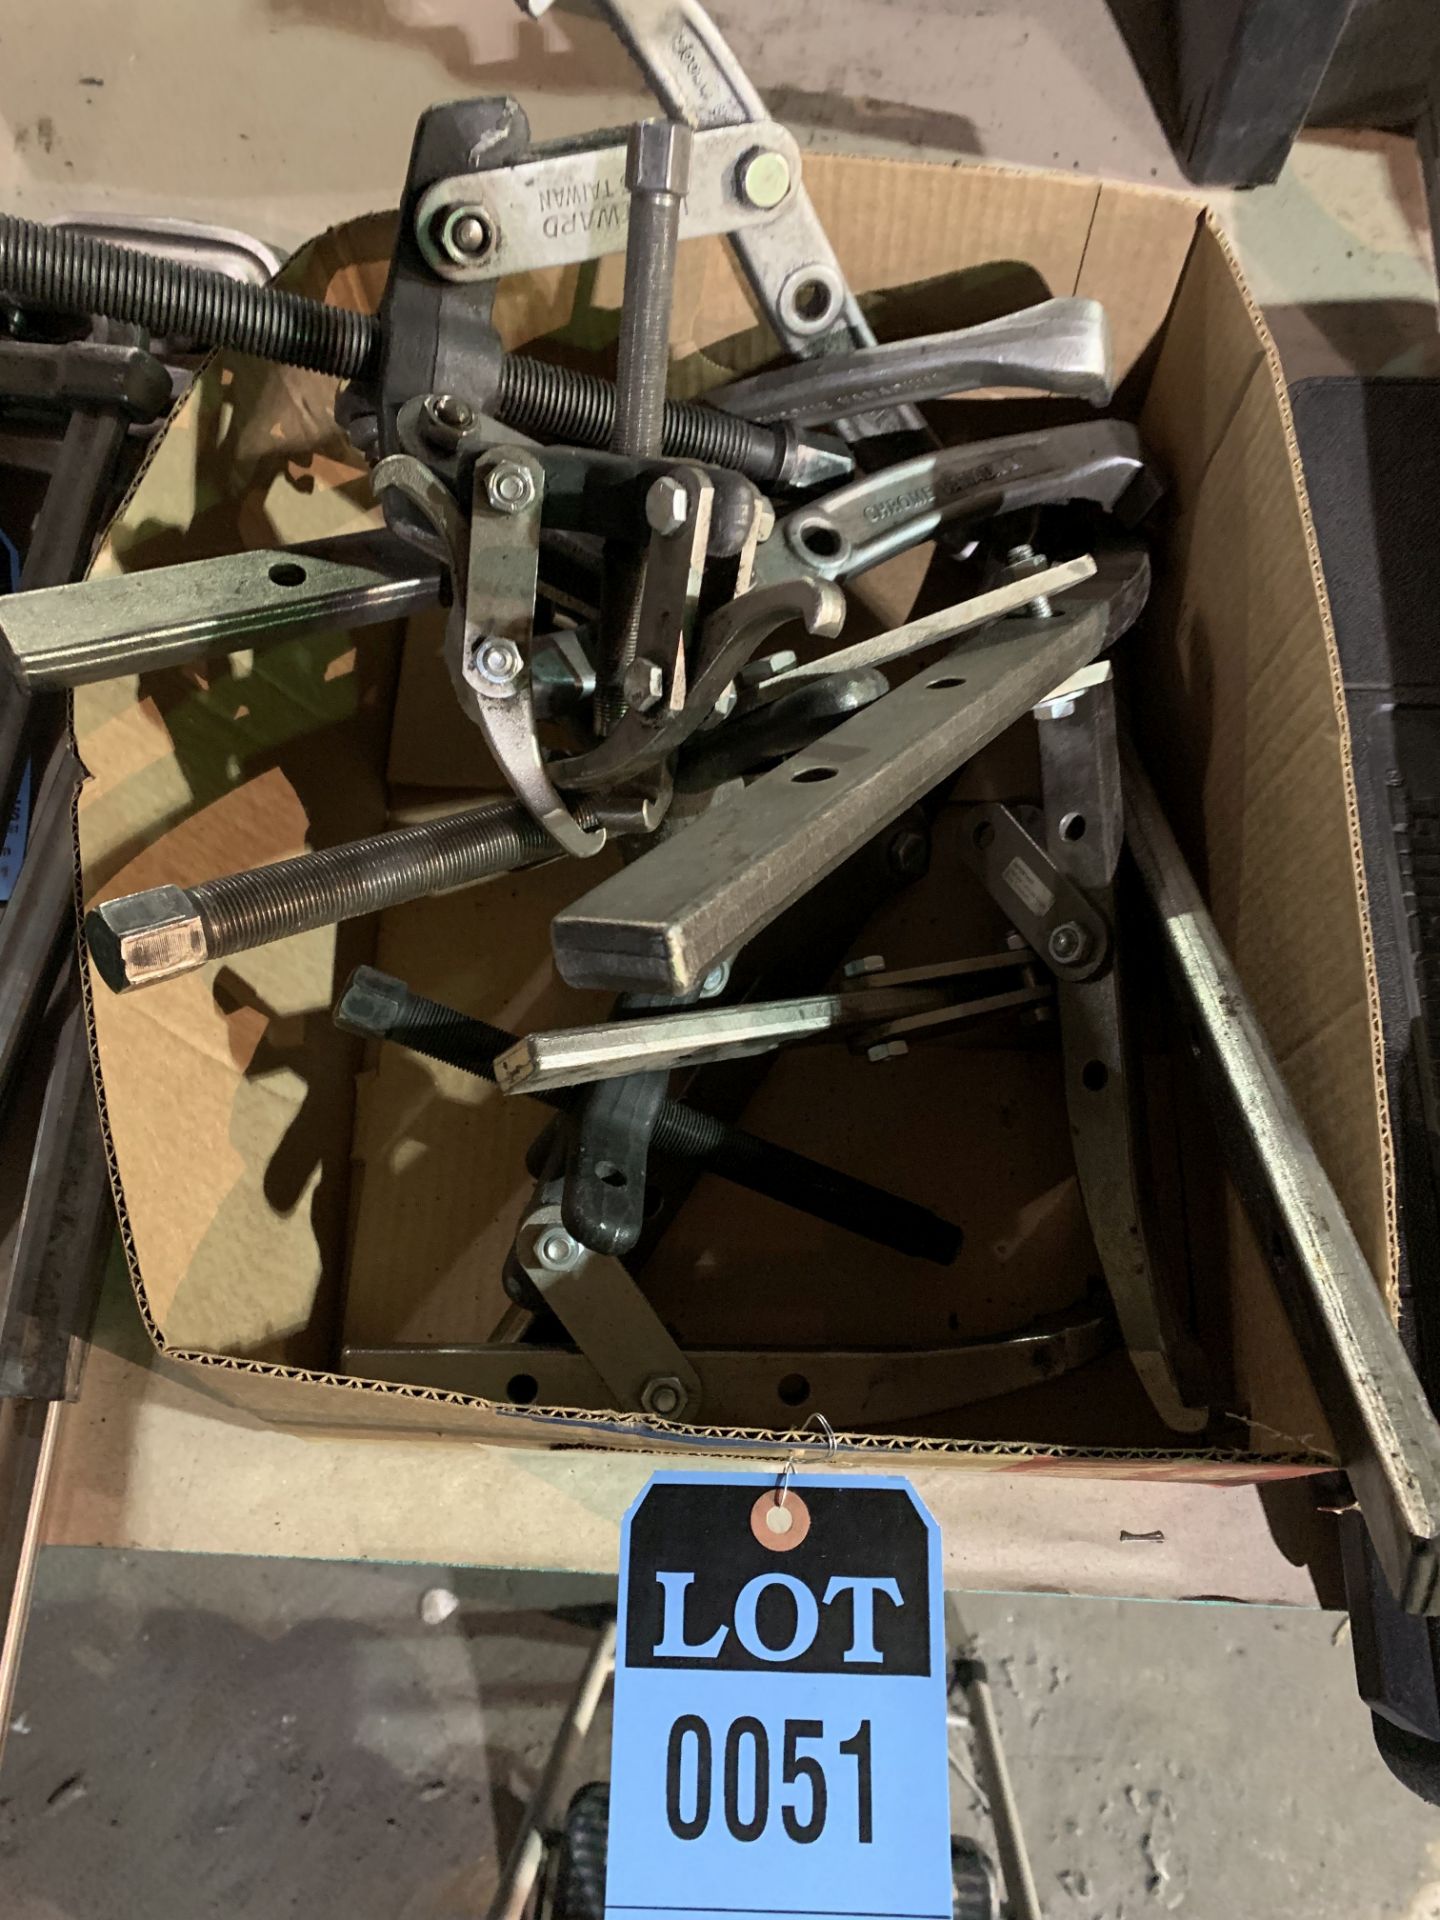 (LOT) GEAR PULLERS **LOCATED AT 111 W. WESTCOTT WAY**